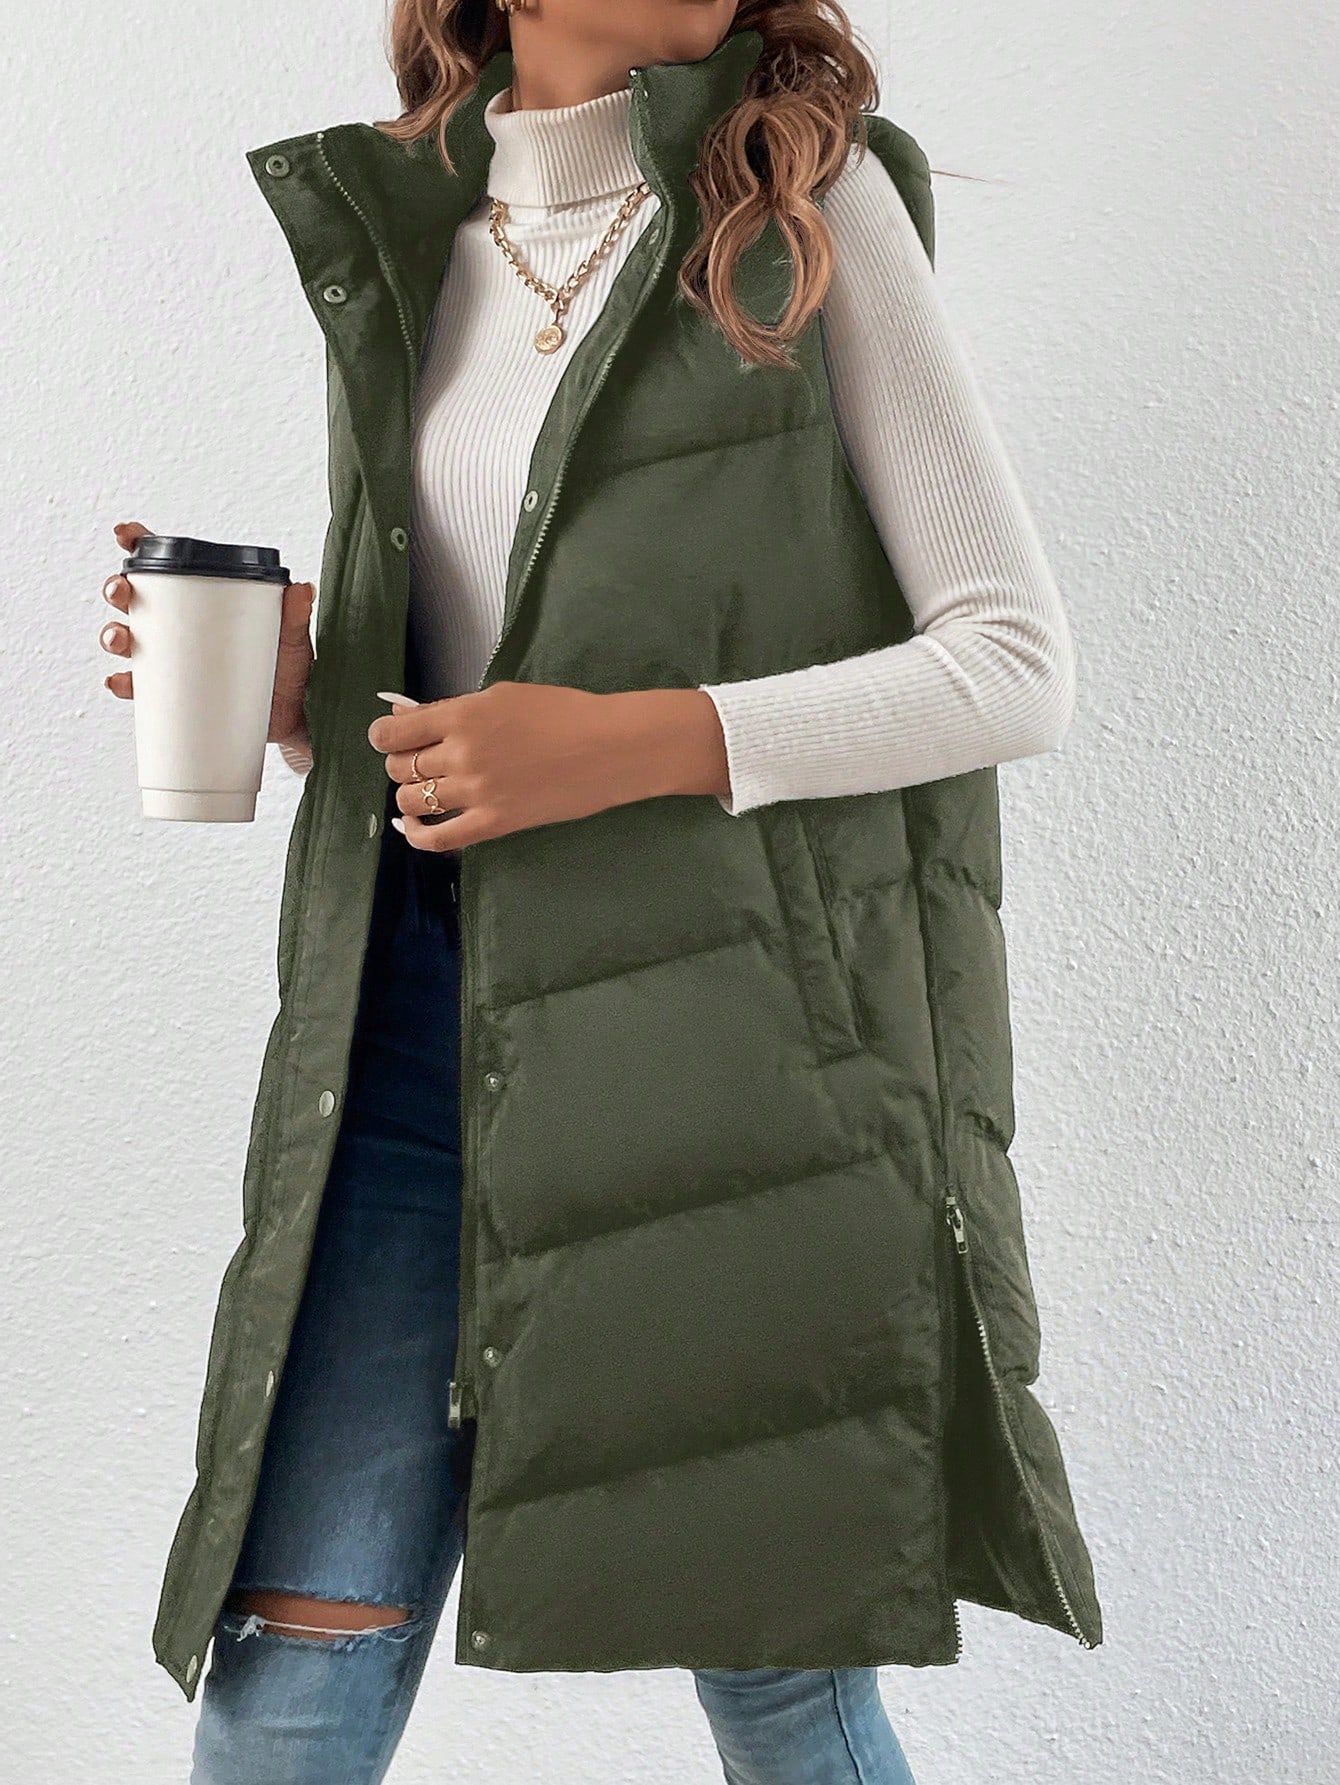 SHEIN Frenchy Zip Up Snap Button Hooded Vest Puffer Coat | SHEIN